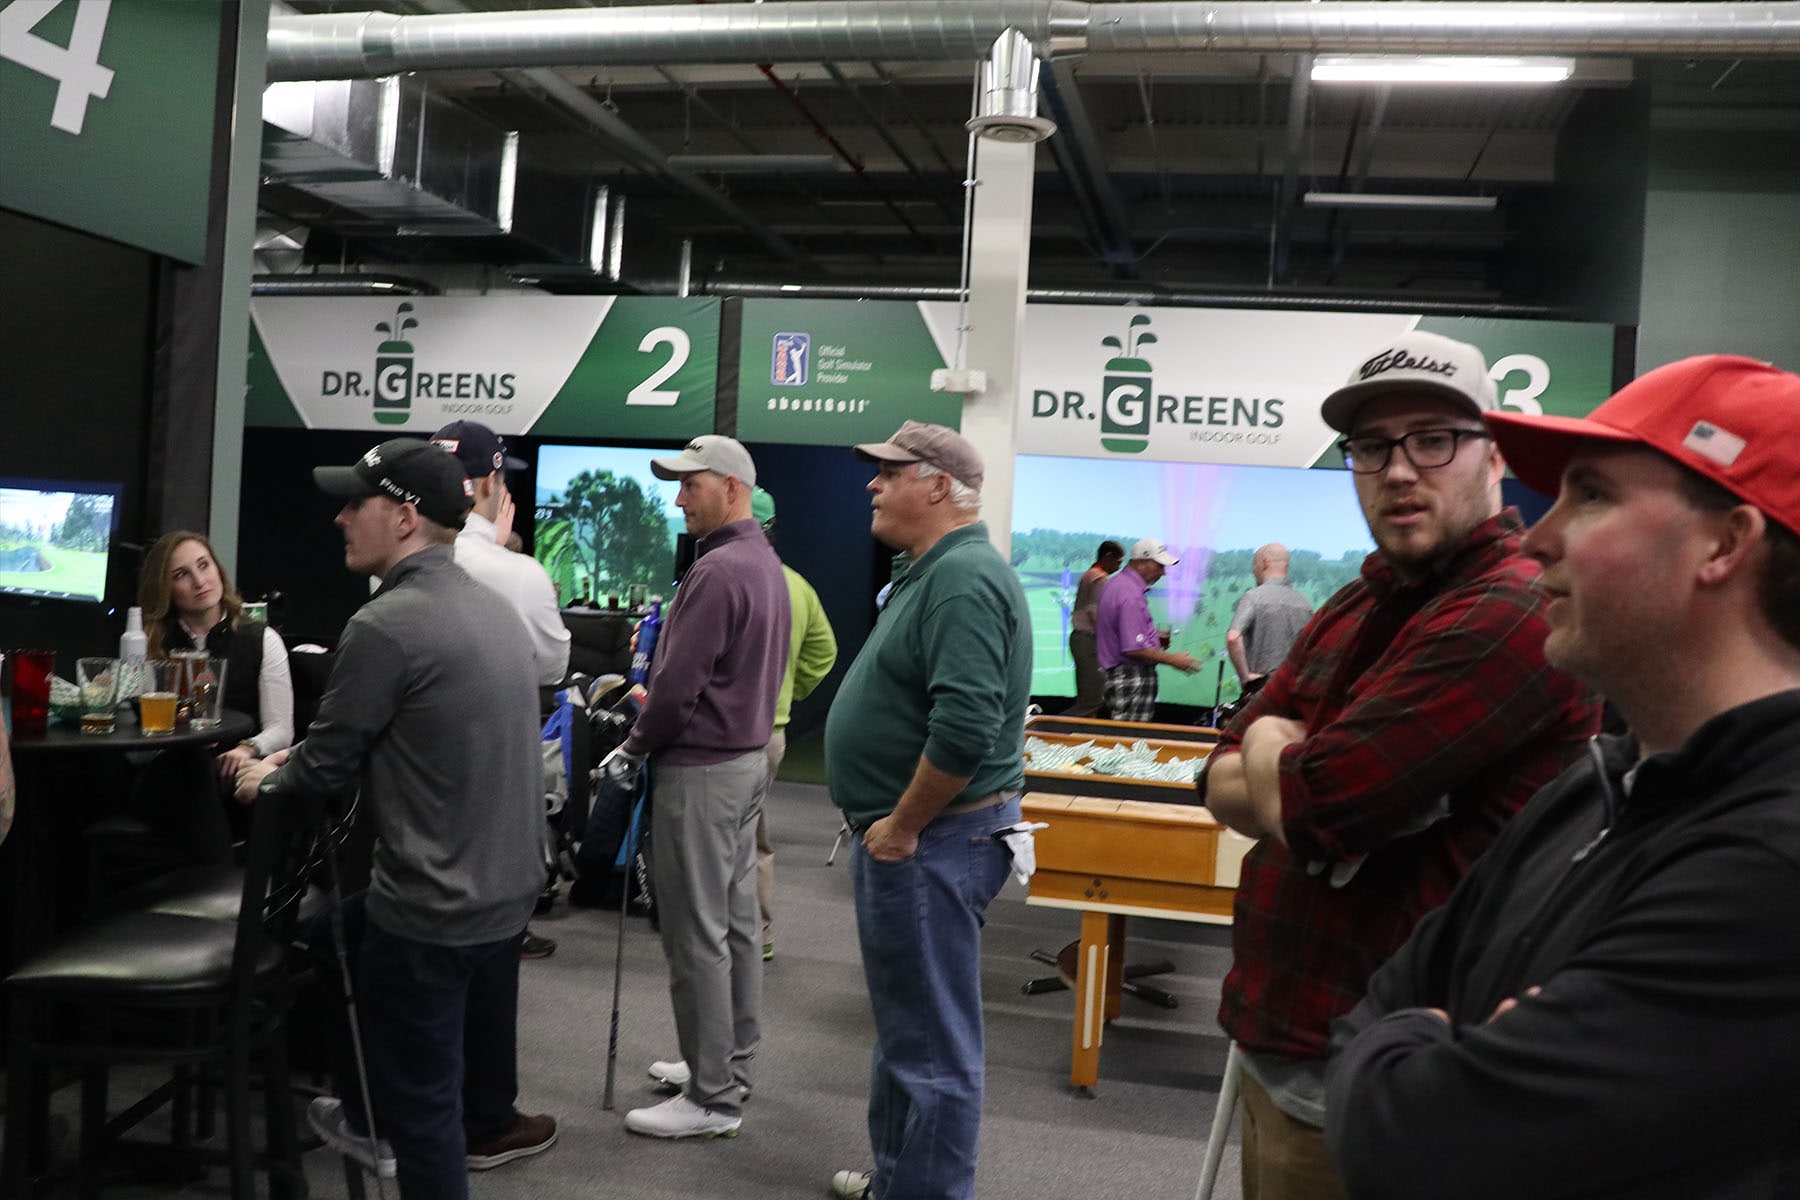 Thanks to everyone who joined us at Dr. Greens in...